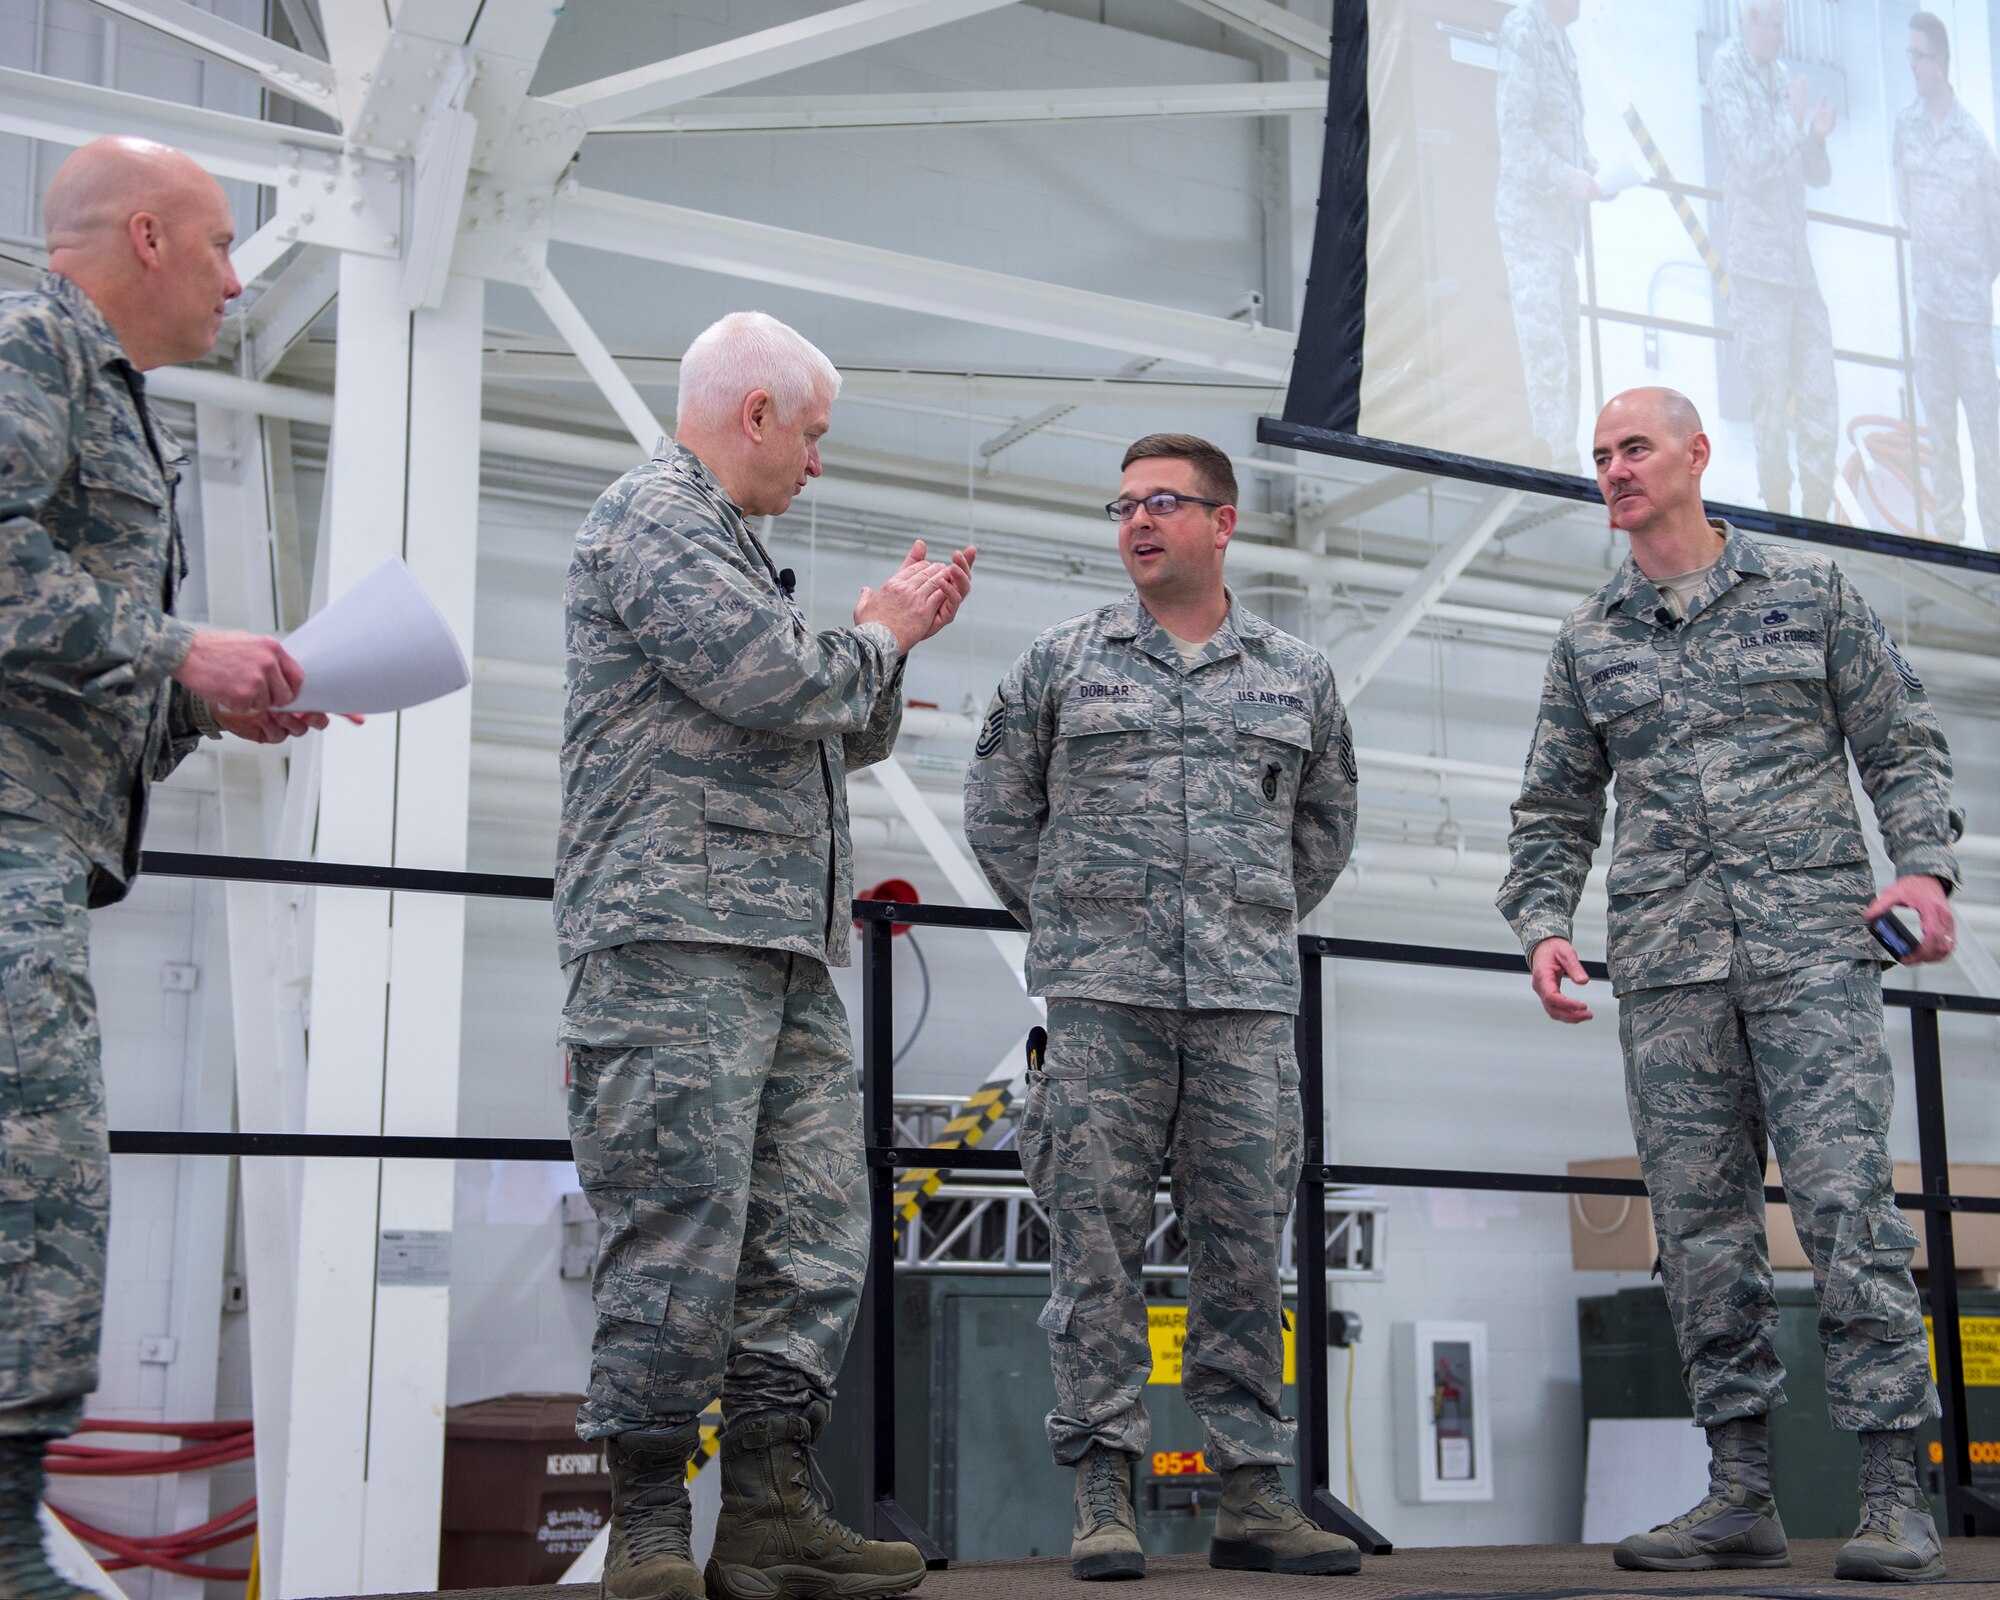 U.S. Air Force Master Sgt. Brian Doblar, 133rd Security Forces Squadron, receives a coin on behalf of Tech. Sgt. Brandon Peterson who was recognized and coined for his behind the scenes work with setting up weapons qualification and classroom instructions for the wing in St. Paul, Minn., March 25, 2018.